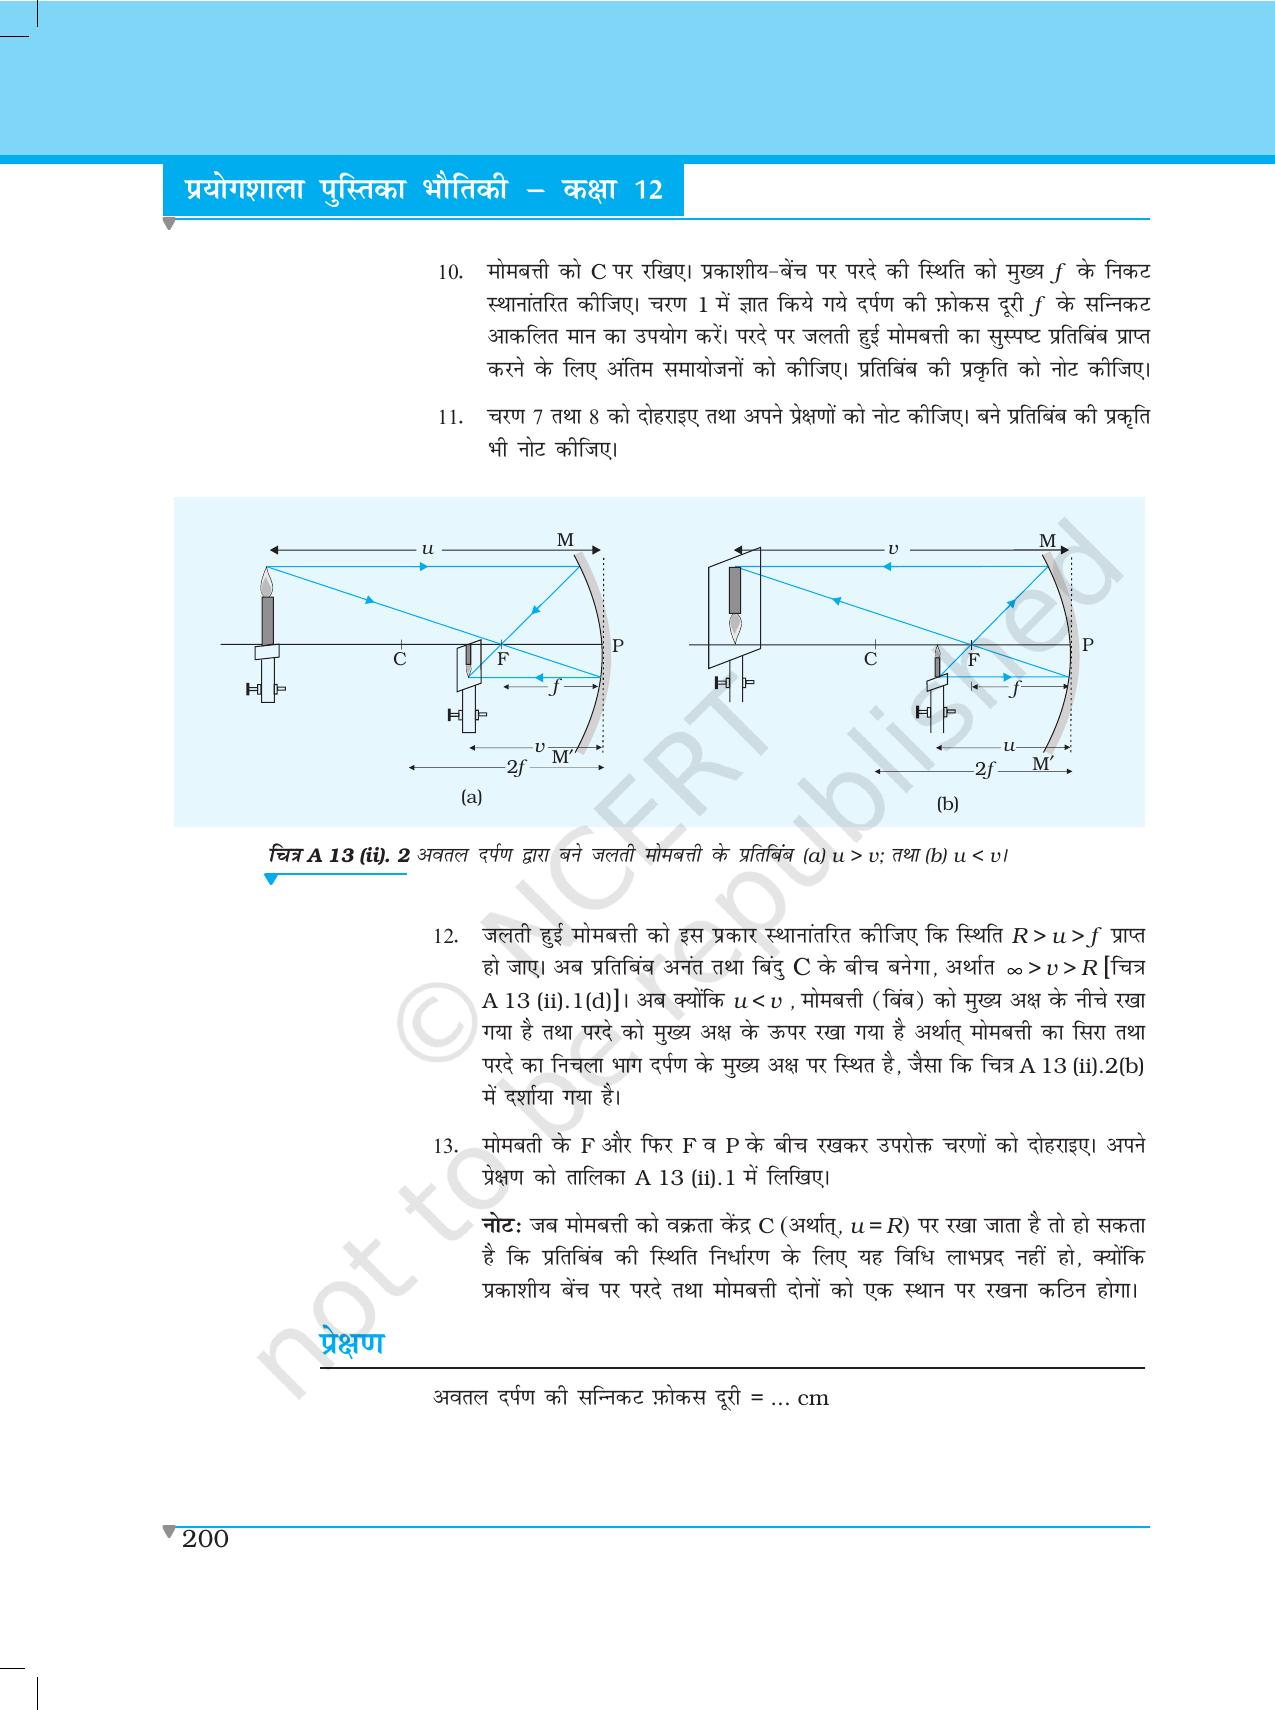 NCERT Laboratory Manuals for Class XII भौतिकी - क्रियाकलाप (12 - 14) - Page 11